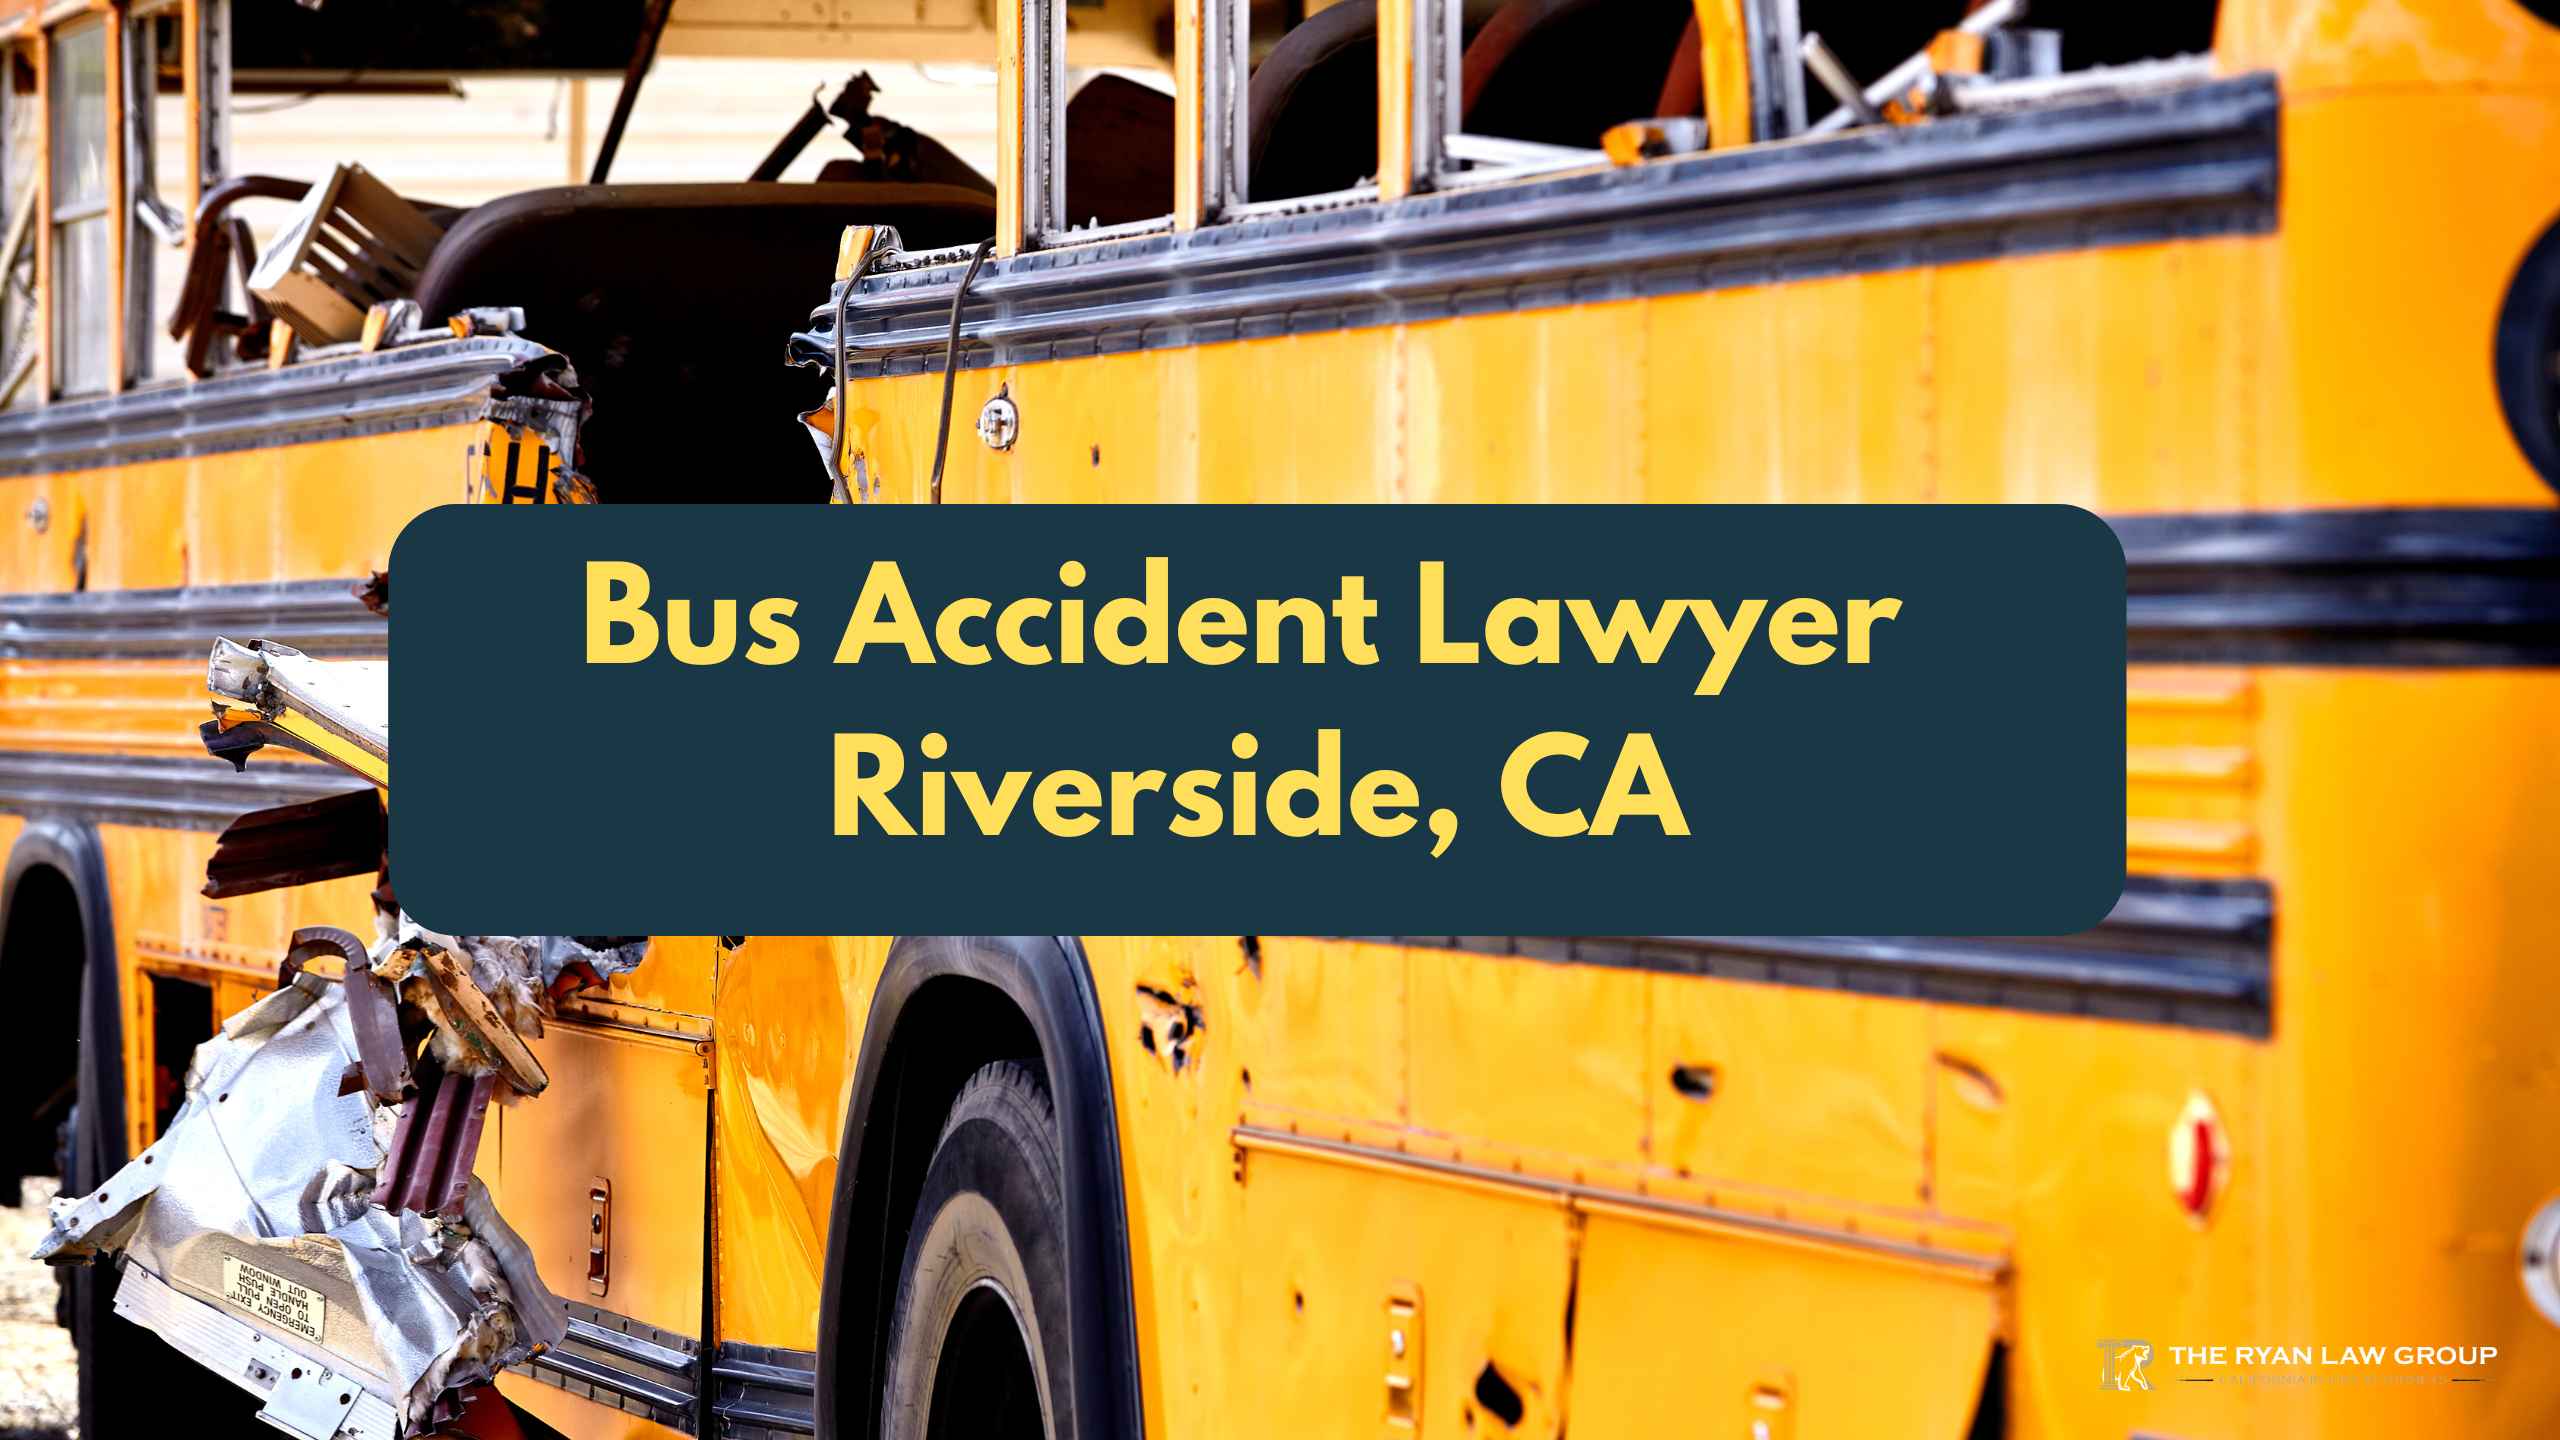 Bus Accident Lawyer Riverside